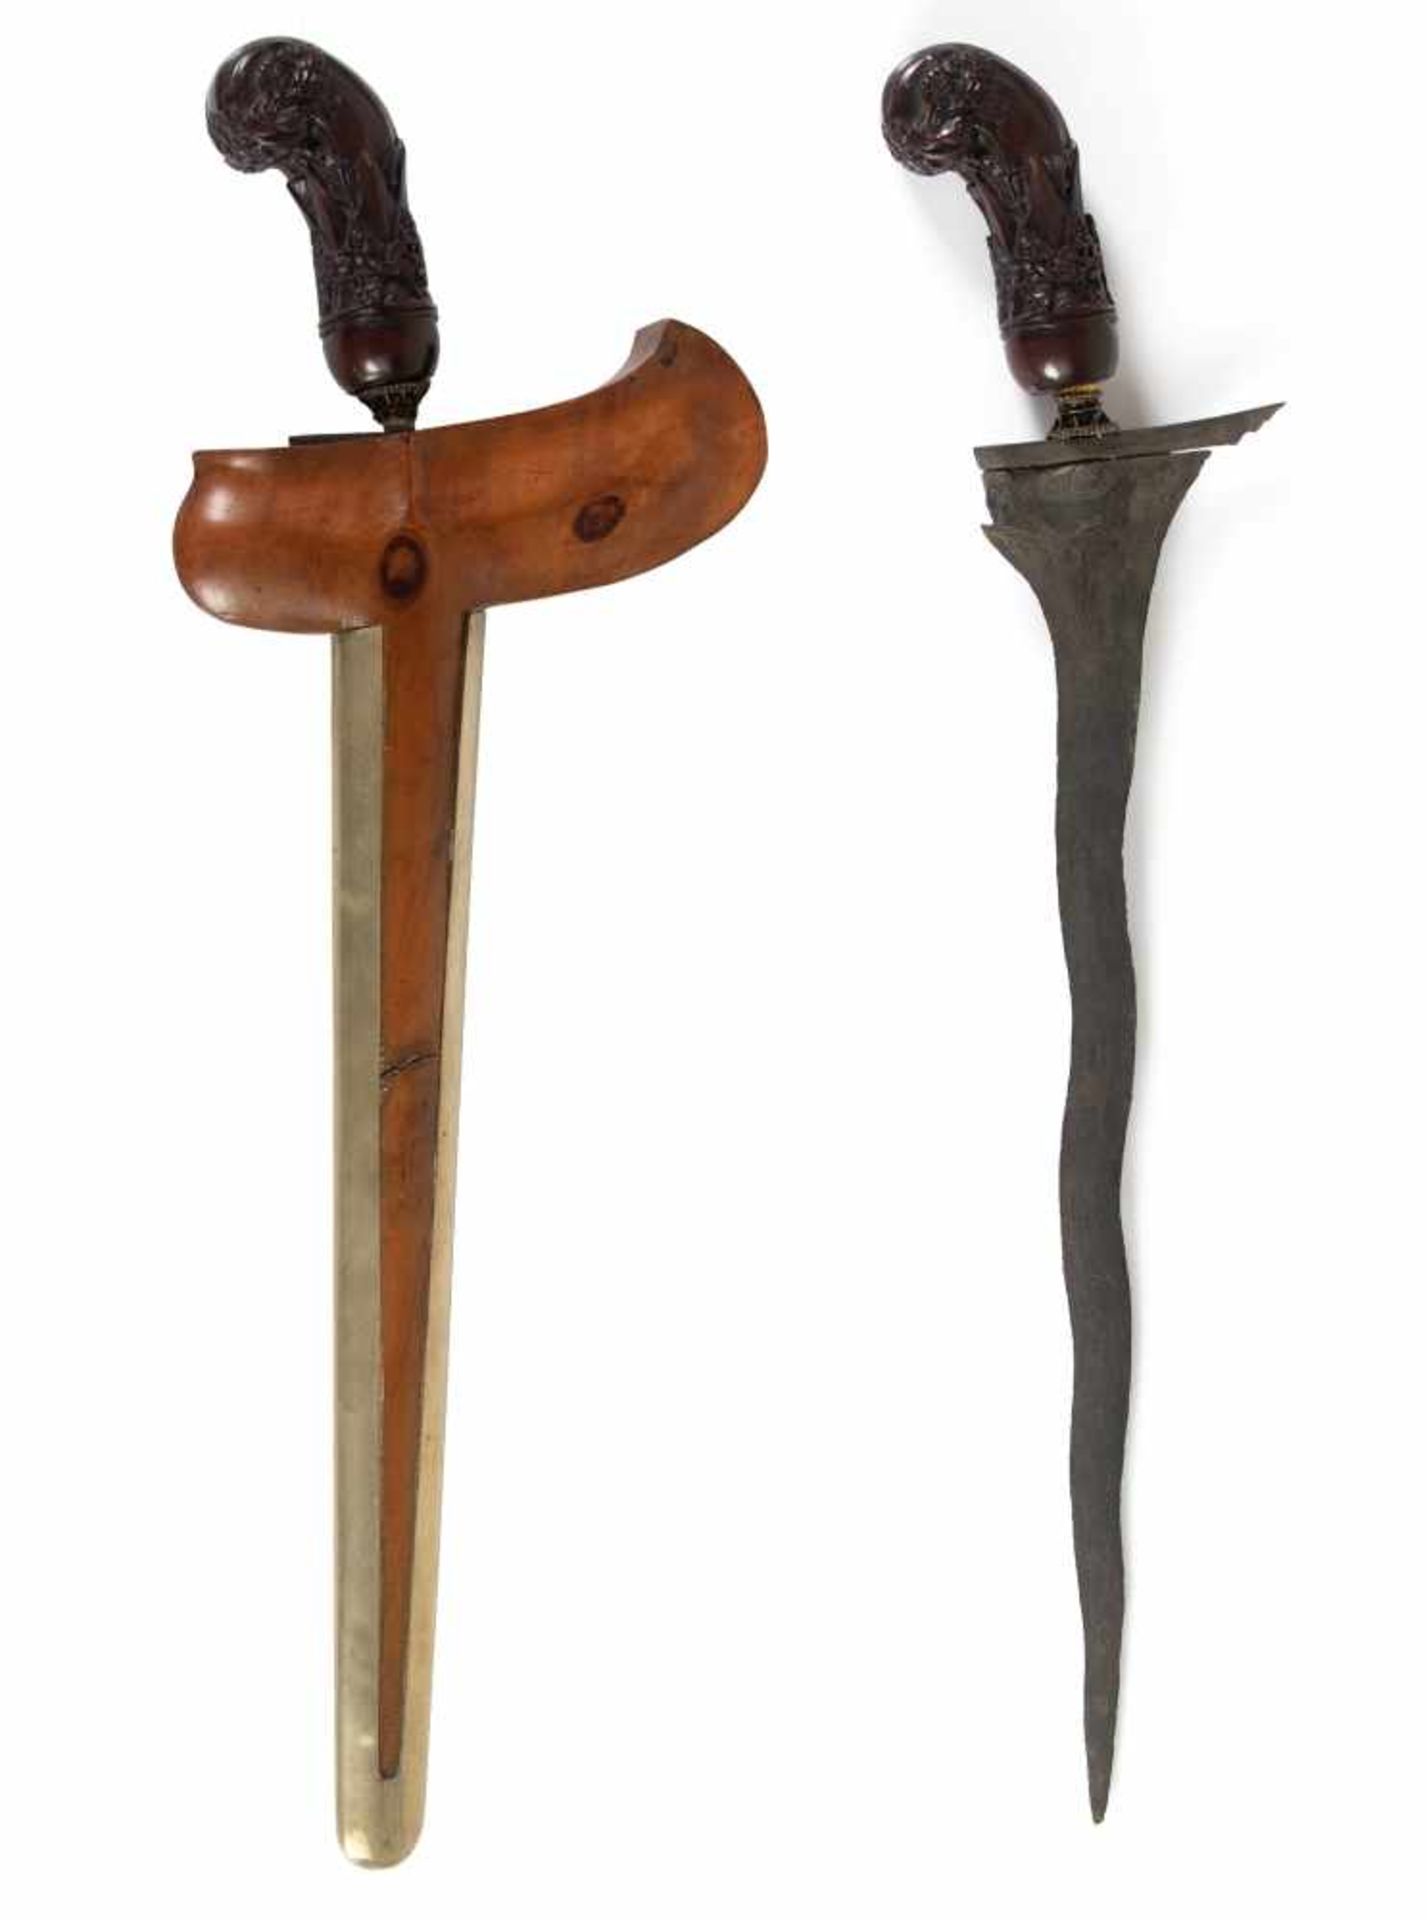 A Javanese Keris, with 14th century blade.A Javanese Keris, with 14th century blade.Umur (age): From